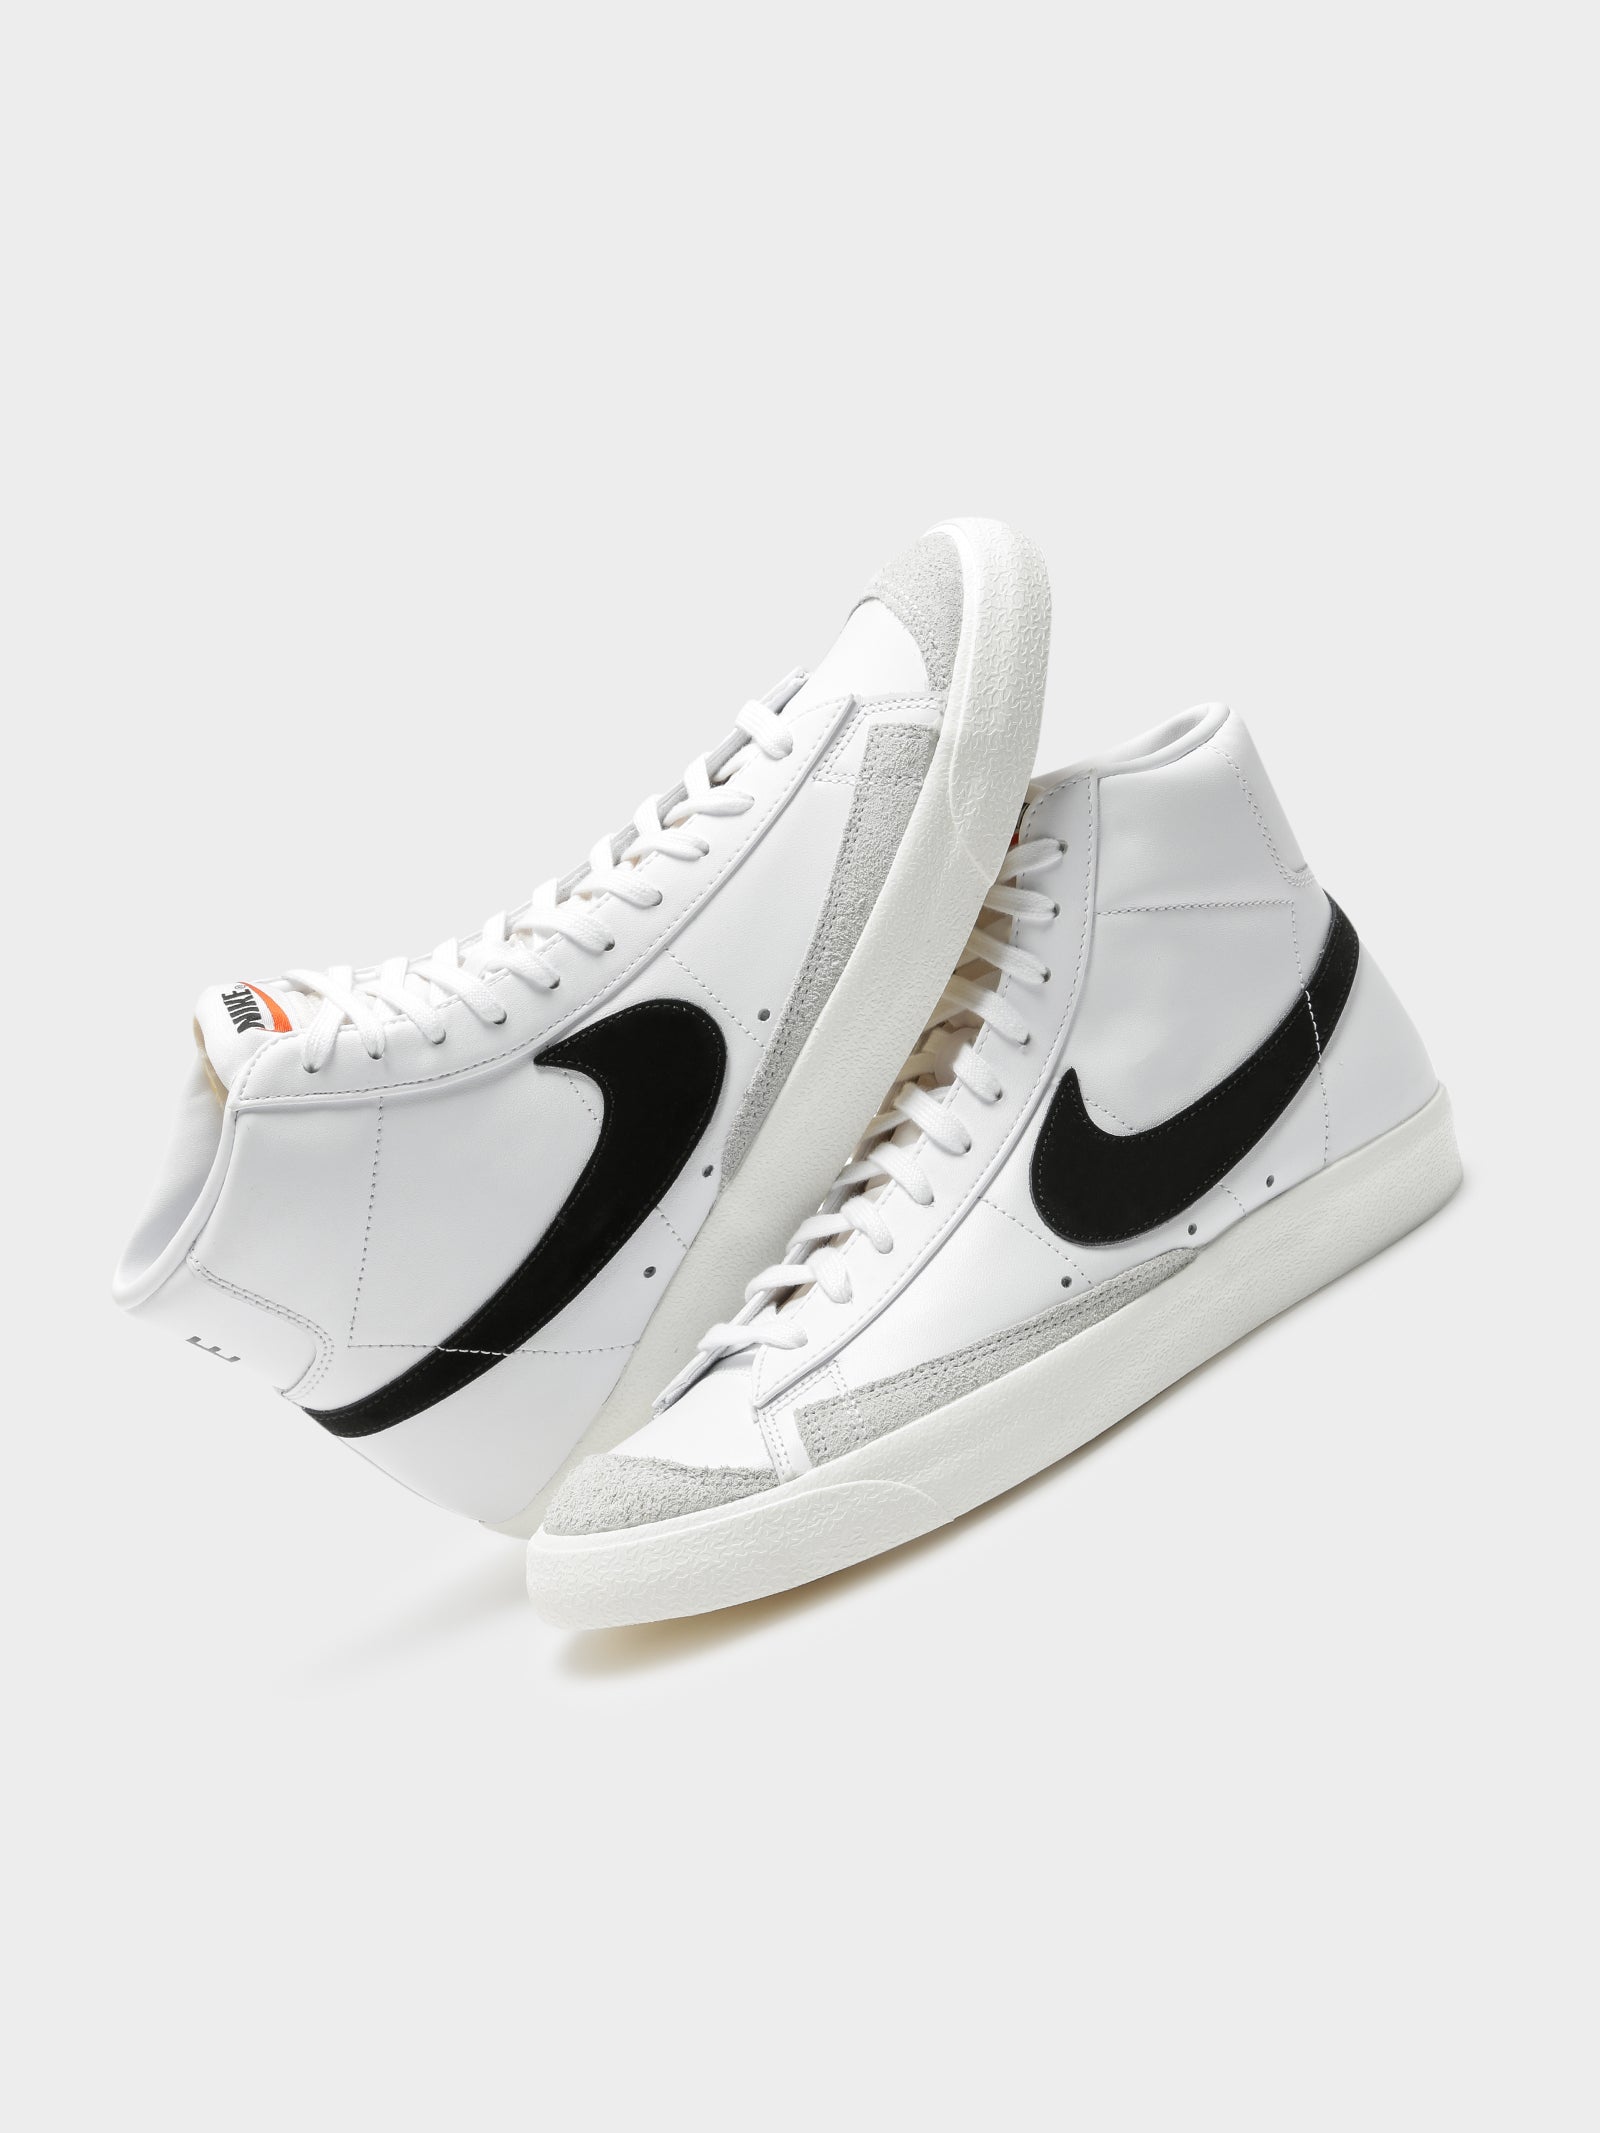 Mens Blazer Mid 77 Top Sneakers in White & - Glue Store